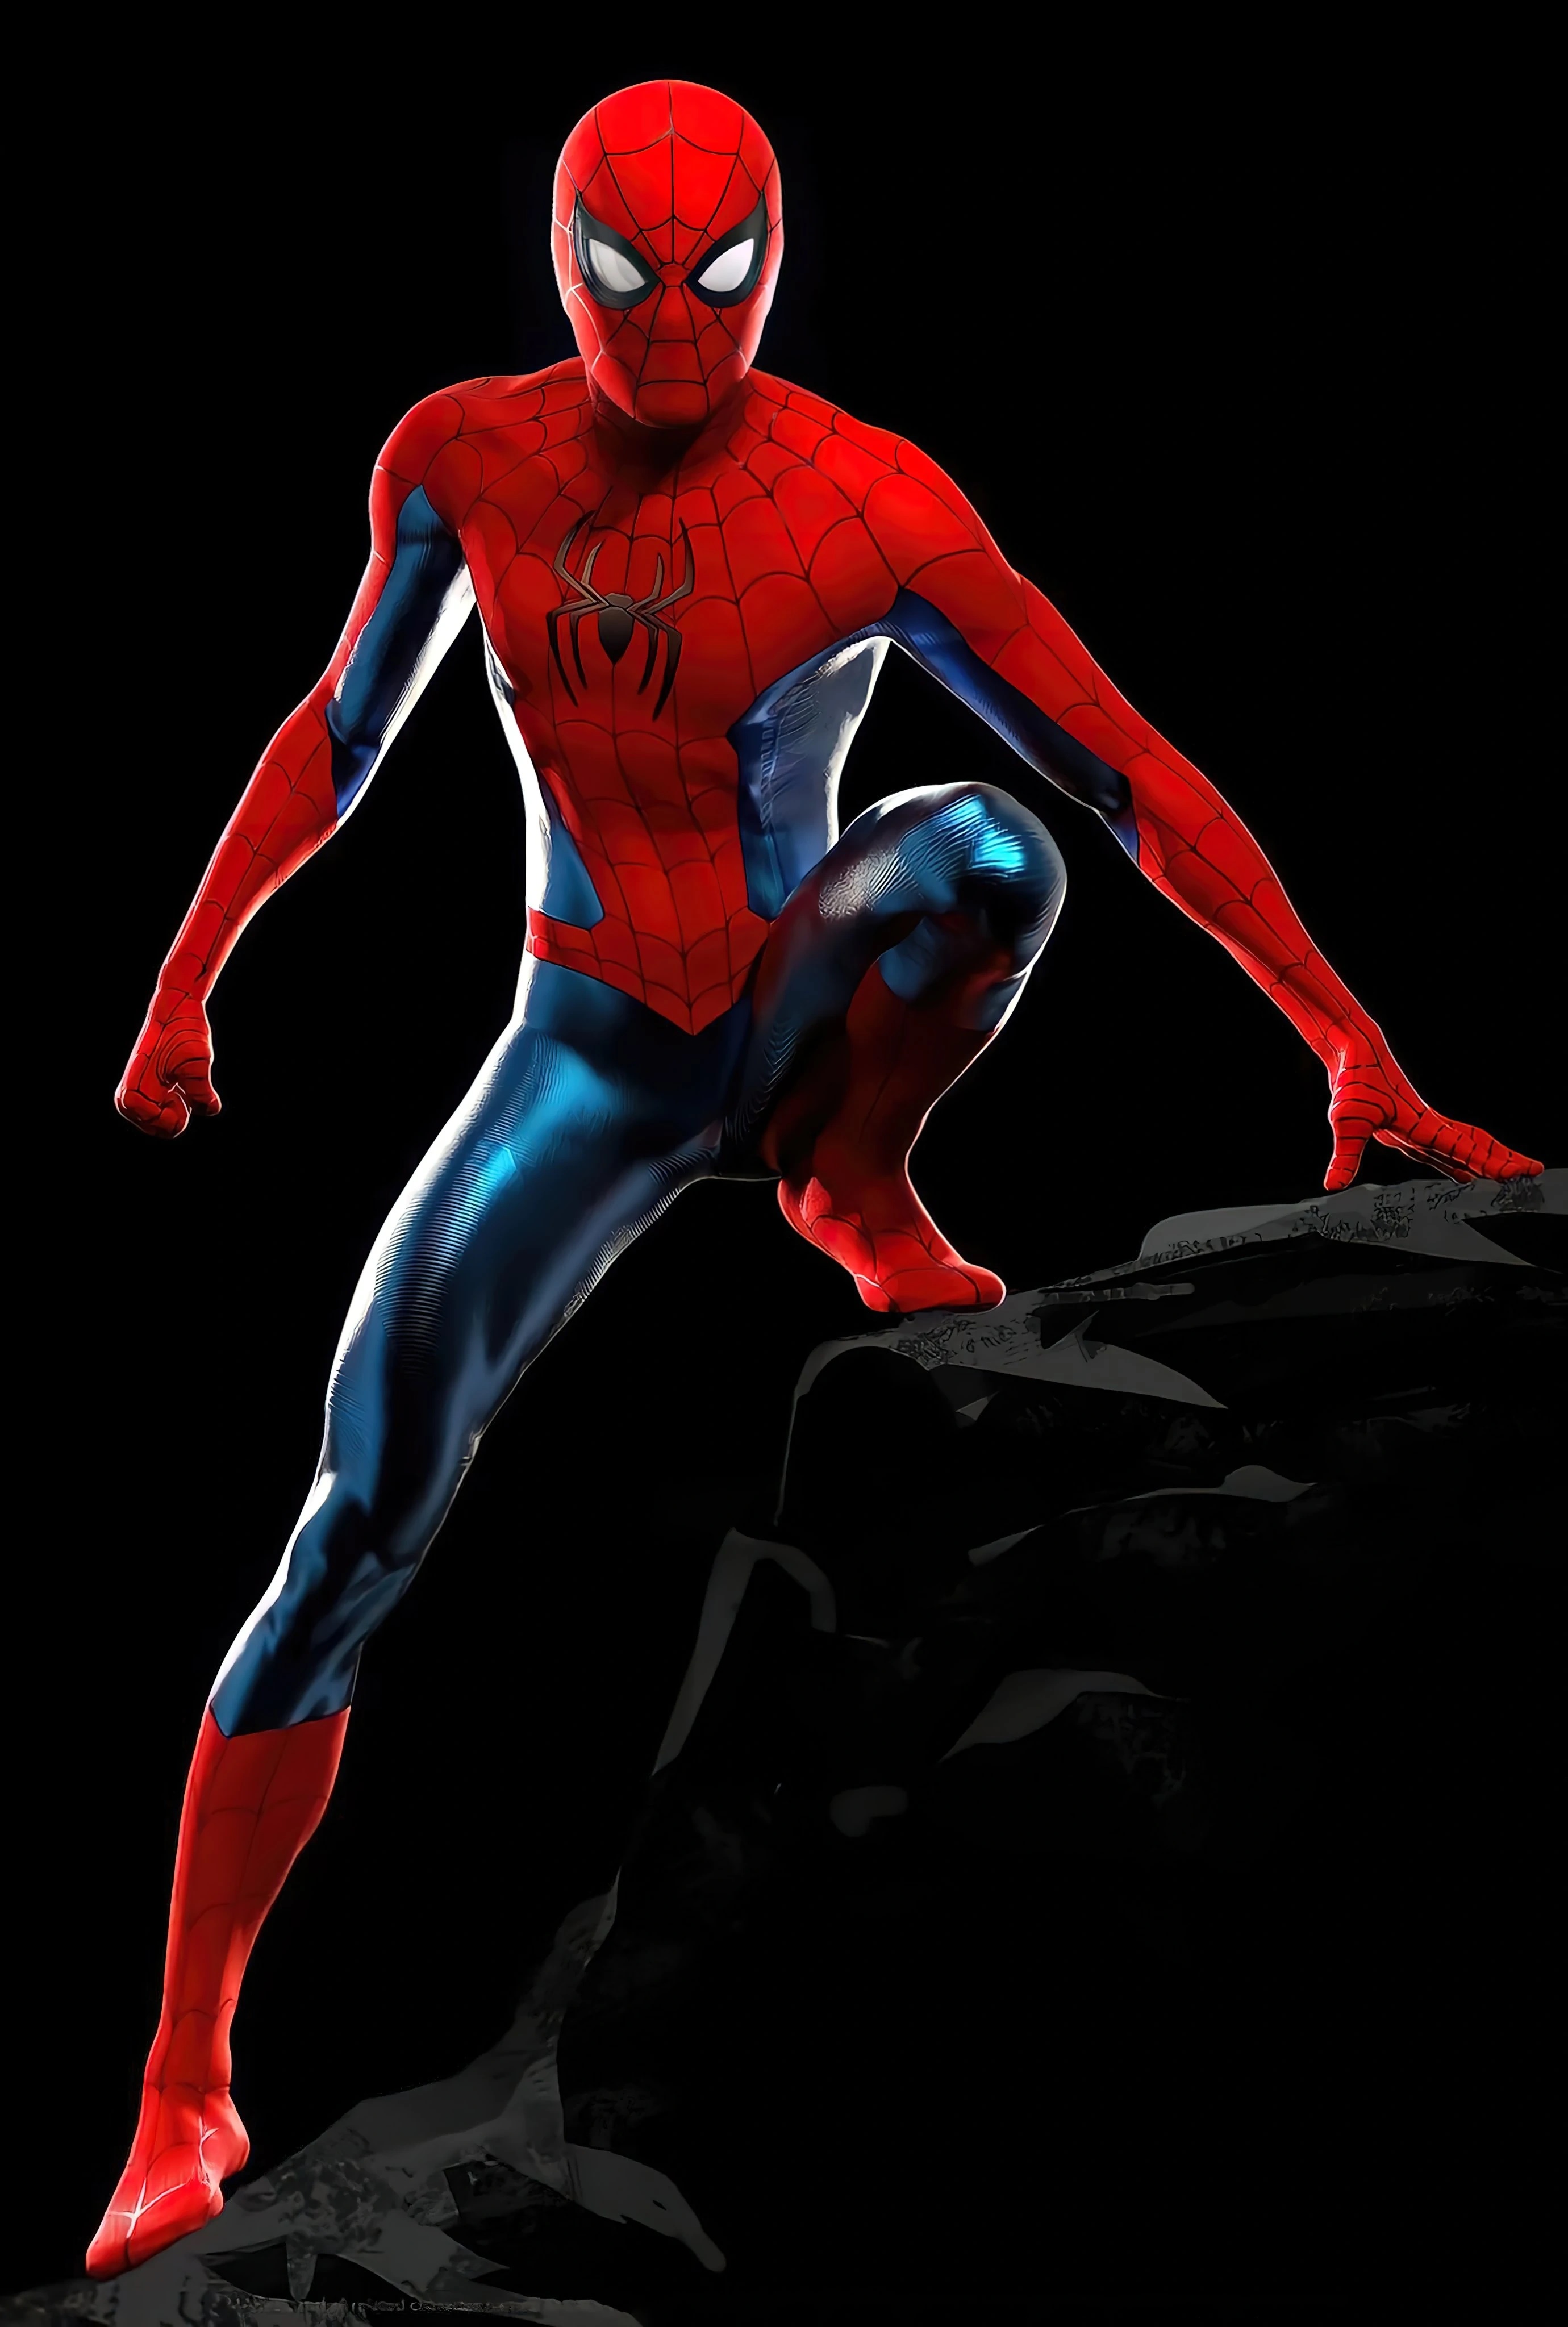 Spider-Man is joining Marvel's Cinematic Universe, Sony and Marvel